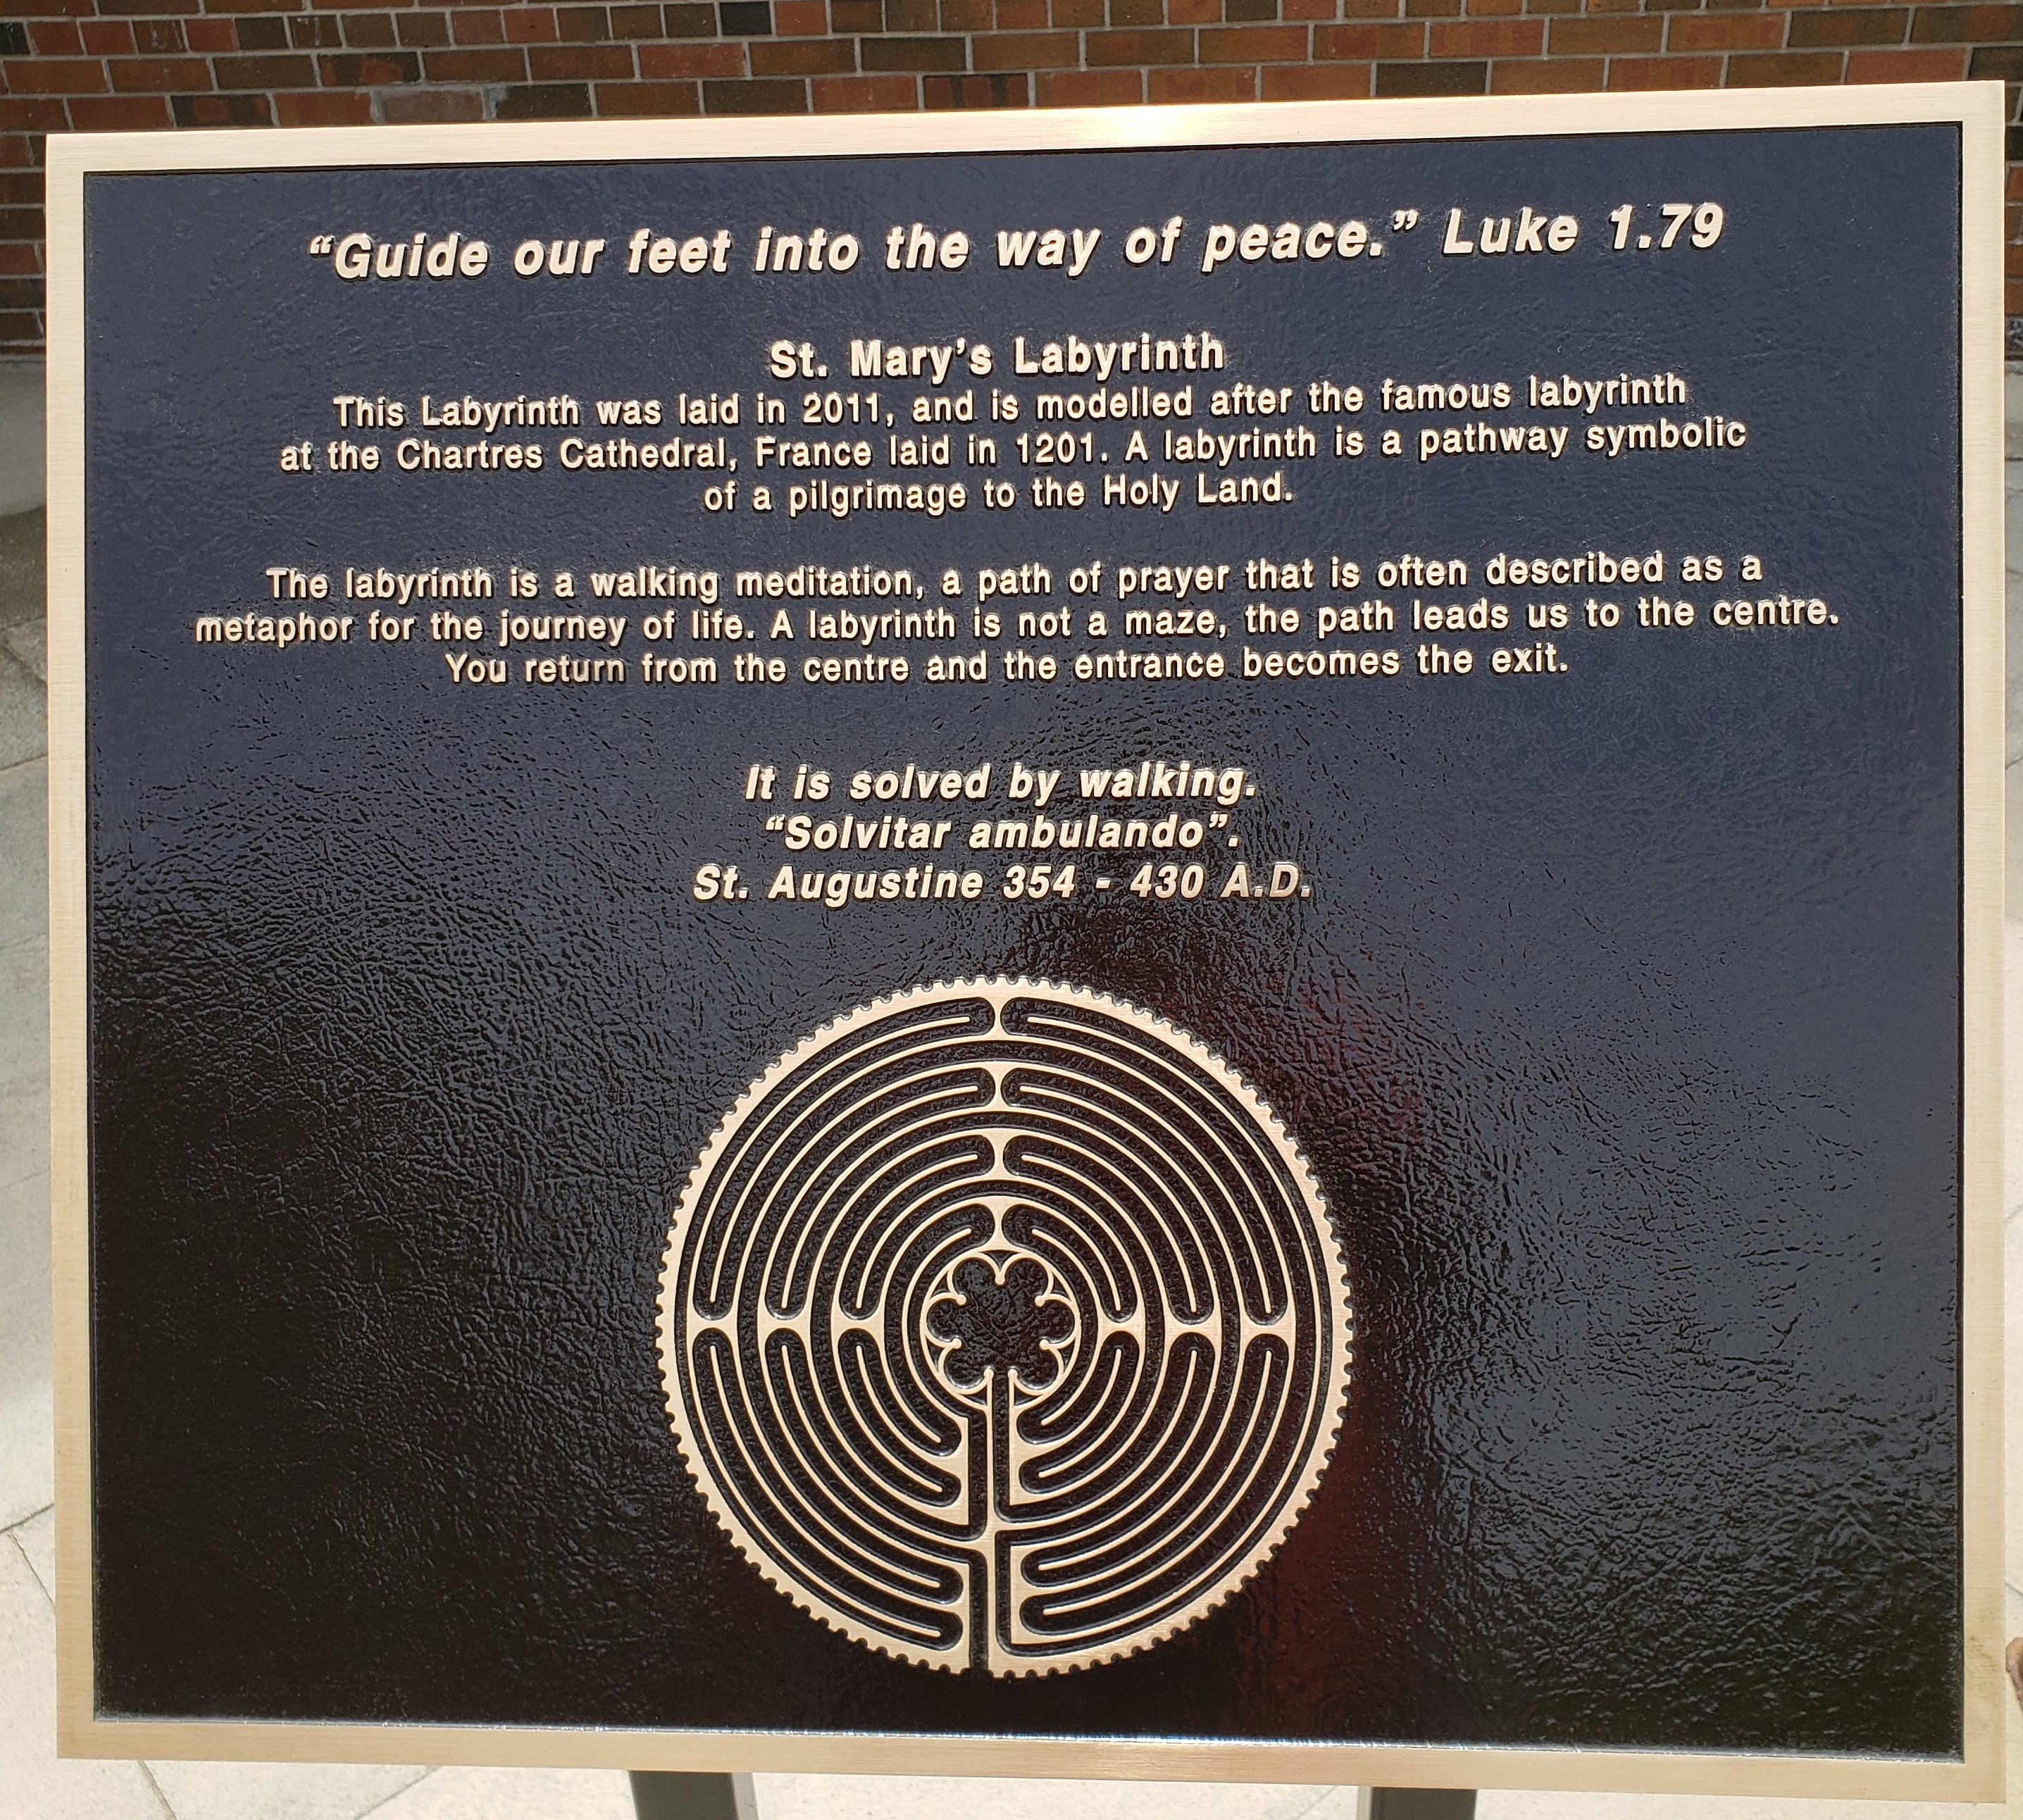 Plaque of Labyrinth outside St. Mary's Church